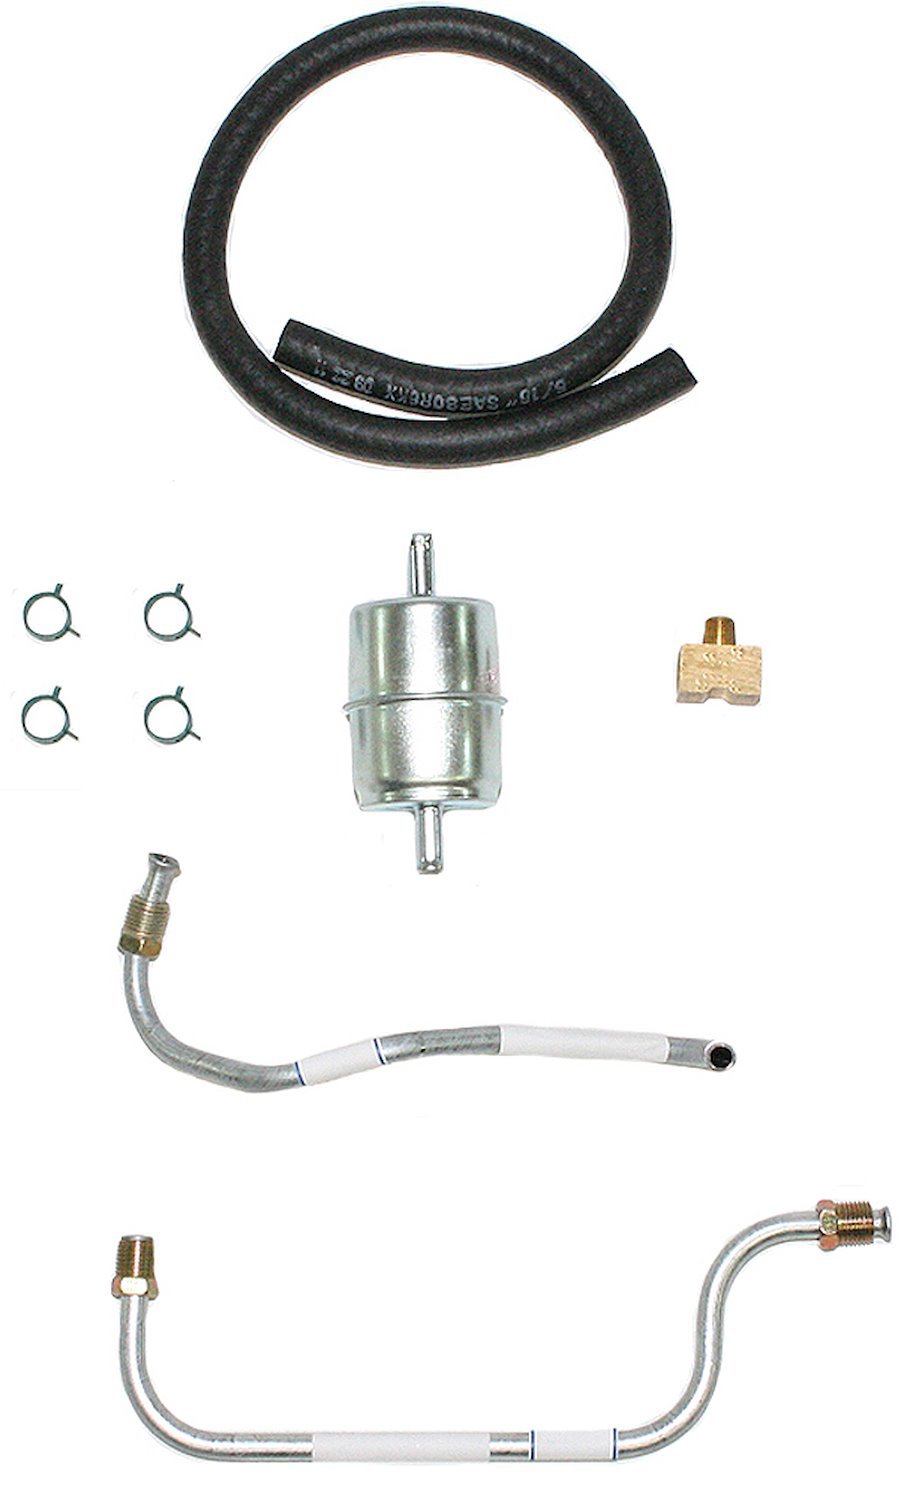 Fuel Line Kit, Fuel Pump to Carburetor for Select 1964-1966 Buick 425 2x4 Models [Stainless Steel]